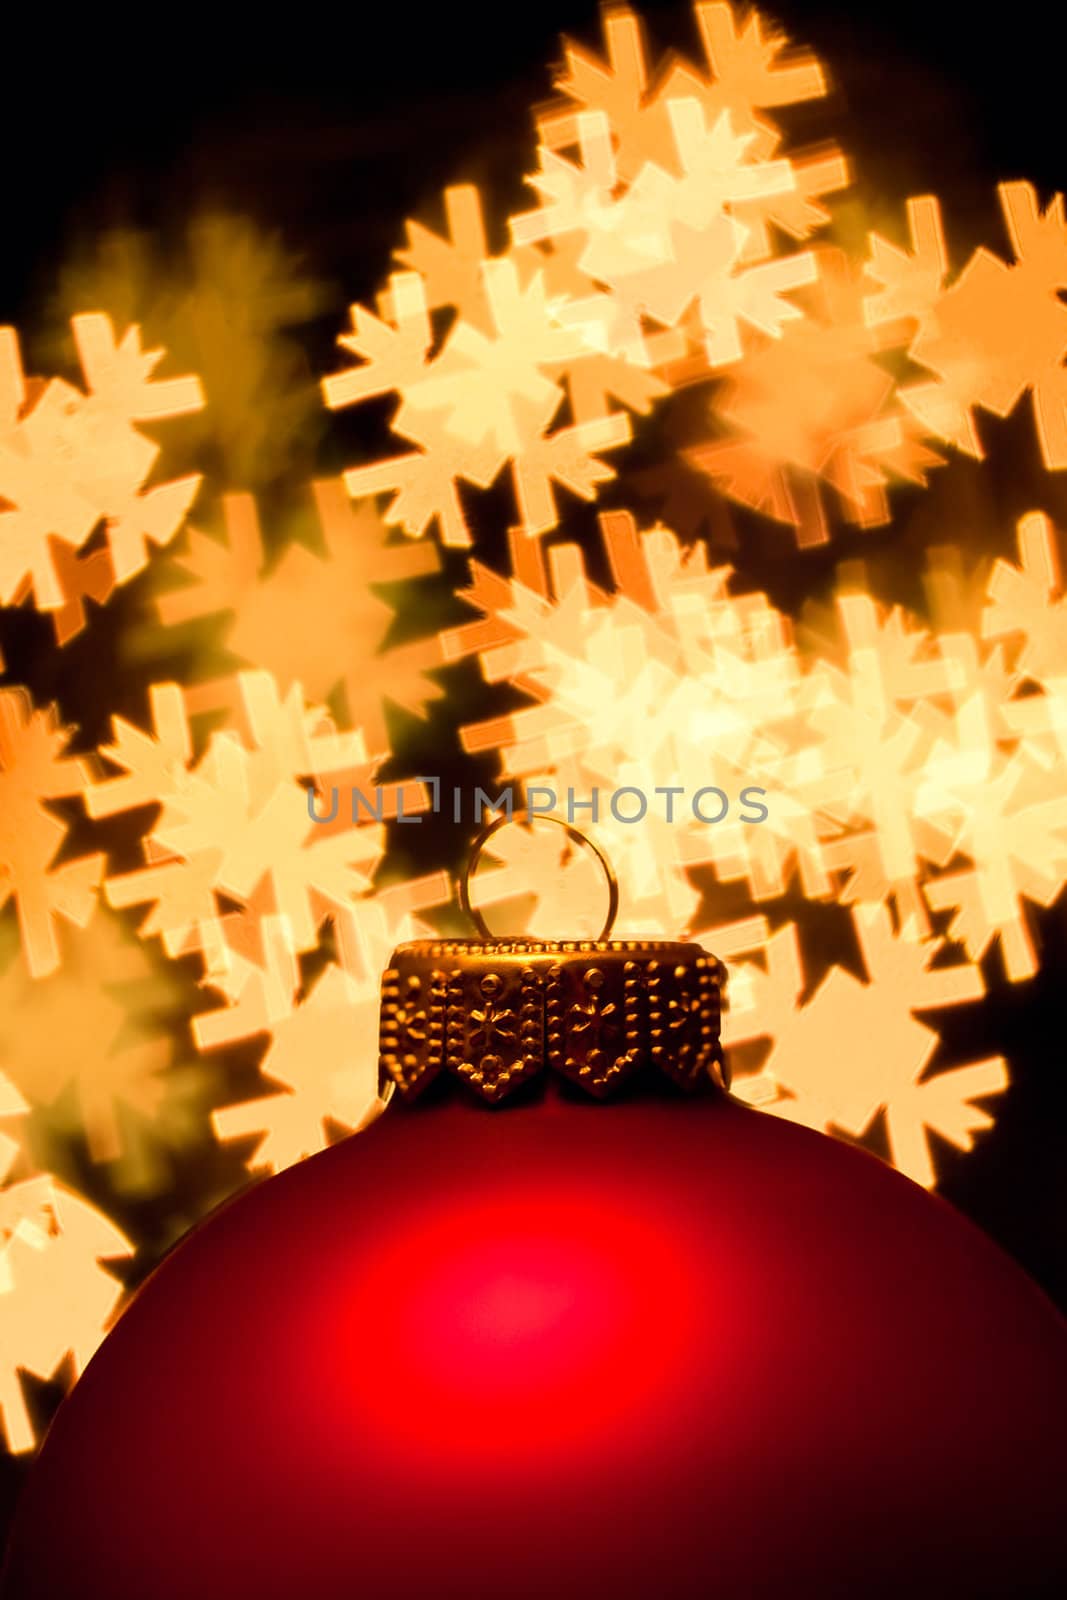 Red Christmas bauble with blured lights in a shape of snowflakes in background, very shallow DOF